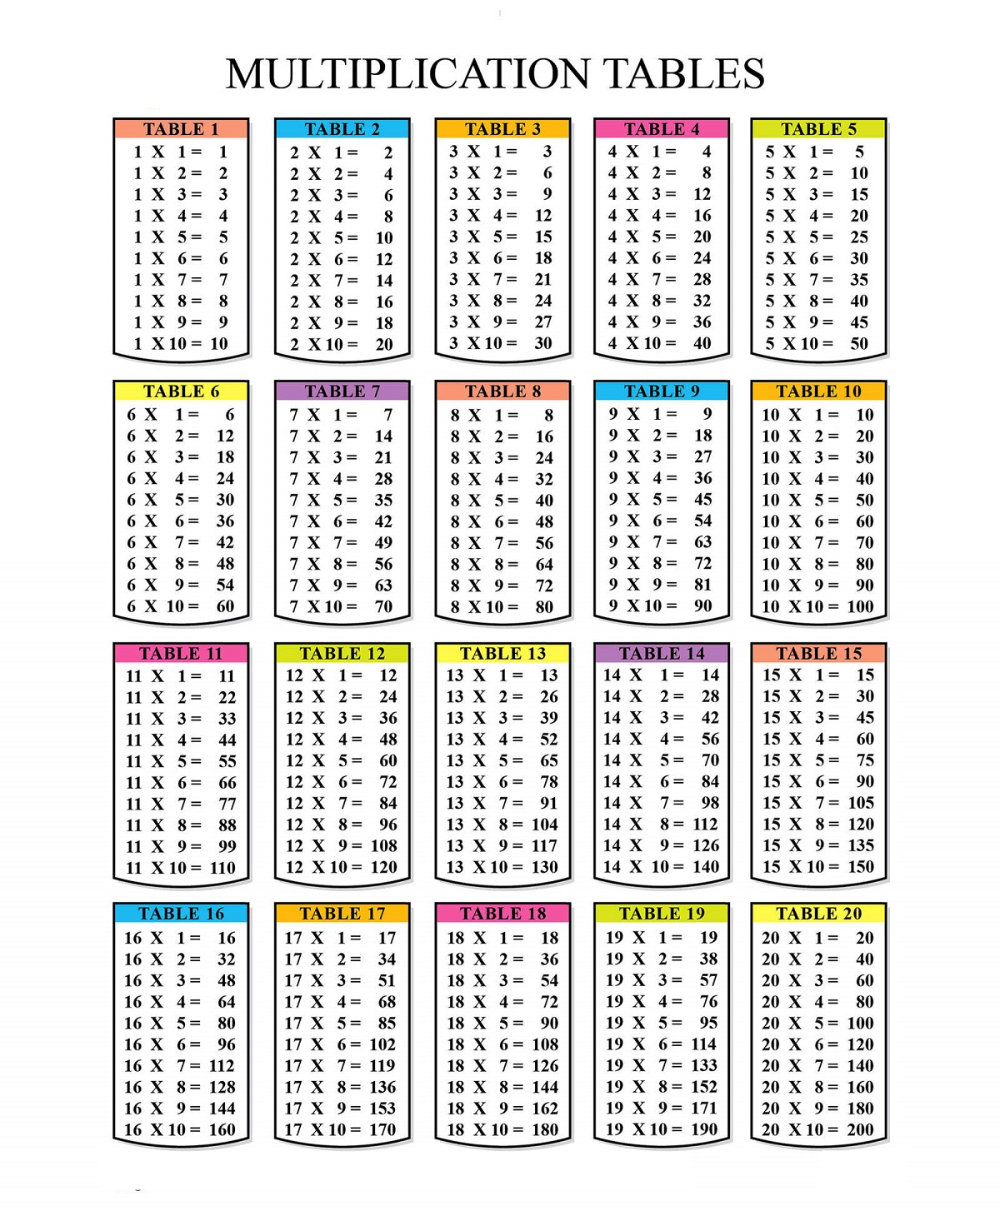 9 times table chart up to 20